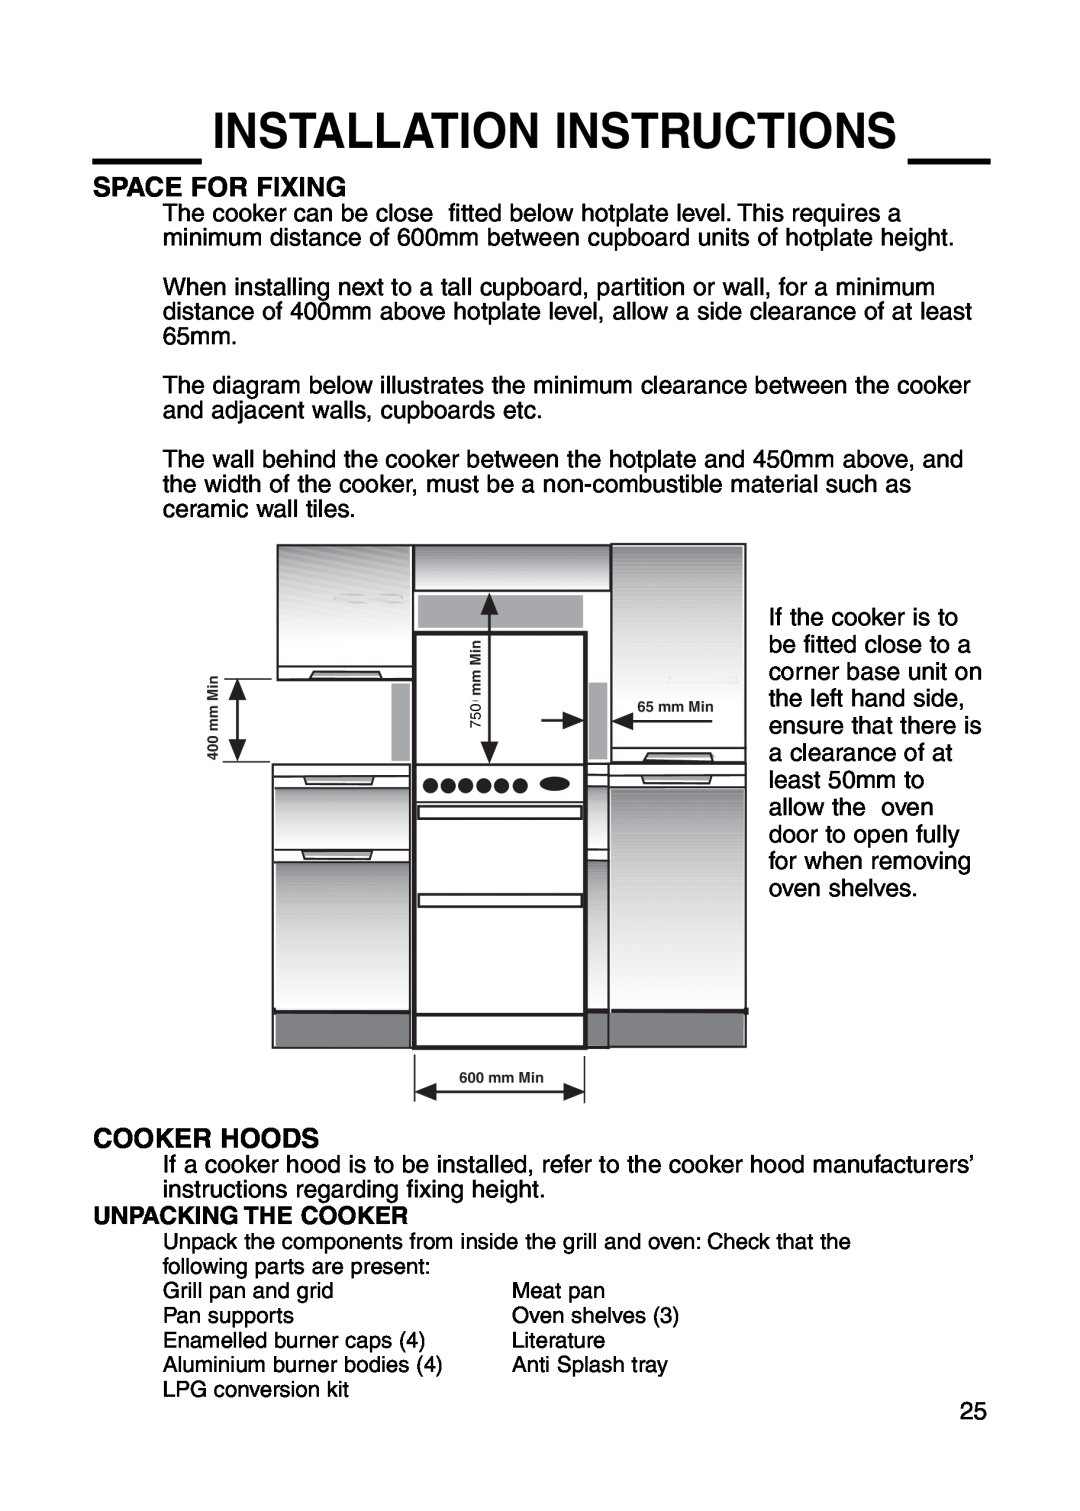 Cannon 10688 installation instructions Space For Fixing, Cooker Hoods, Unpacking The Cooker, Installation Instructions 